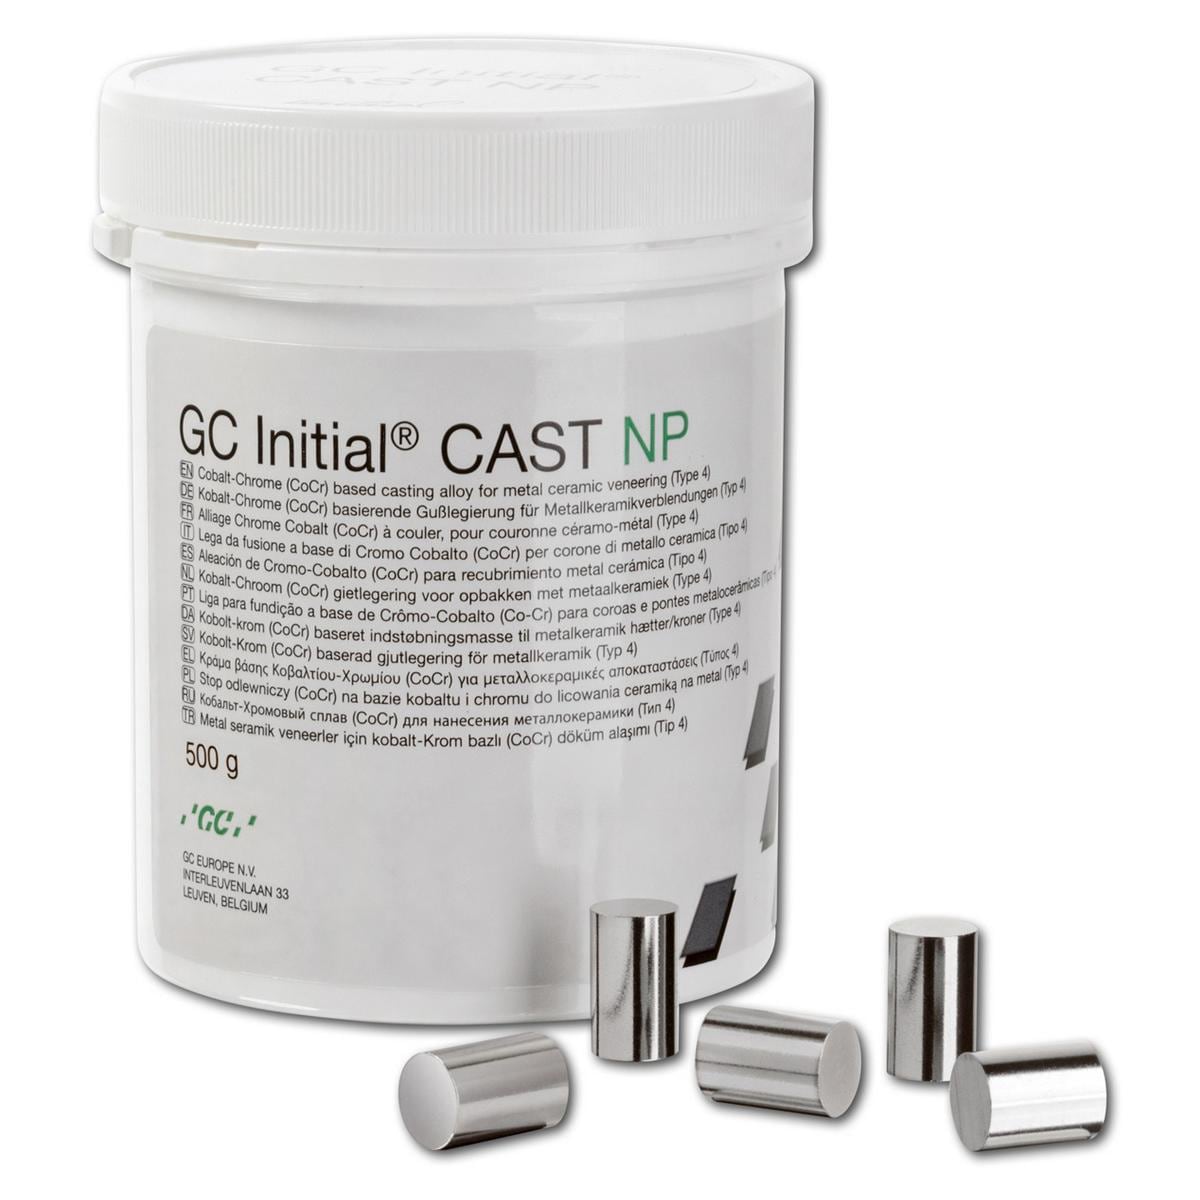 GC Initial® CAST NP - Packung 500 g